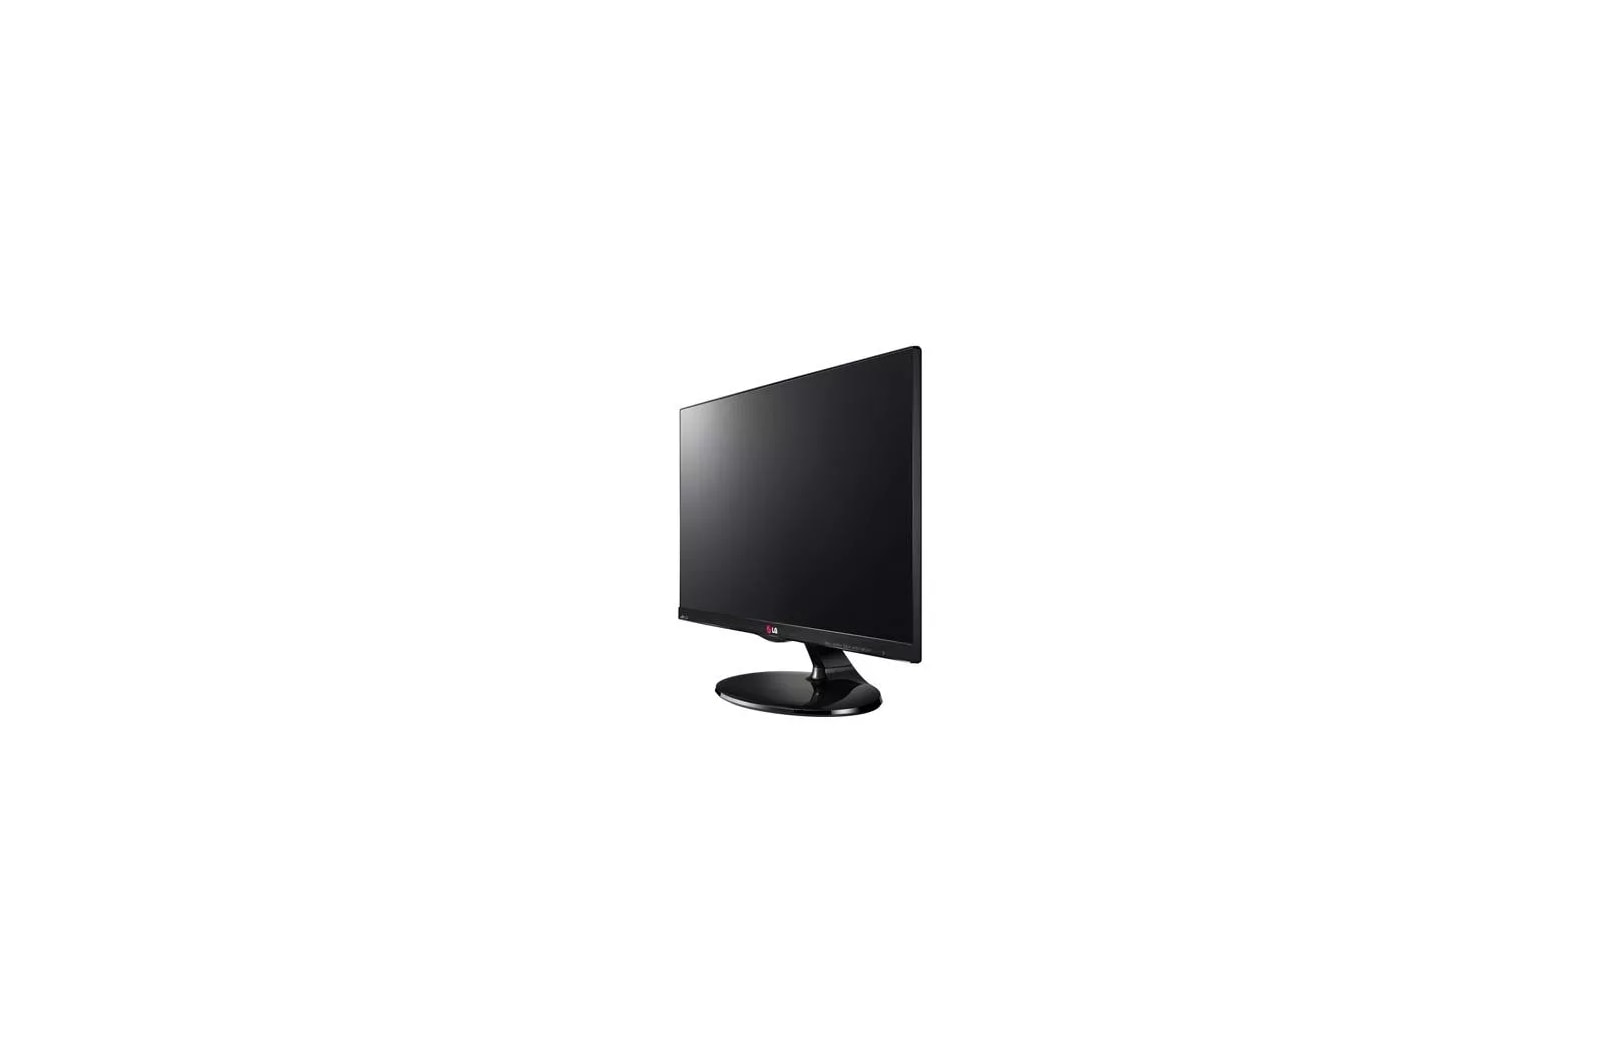 LG 27EA63V-P: 27'' Class IPS LED Monitor with Super Resolution 